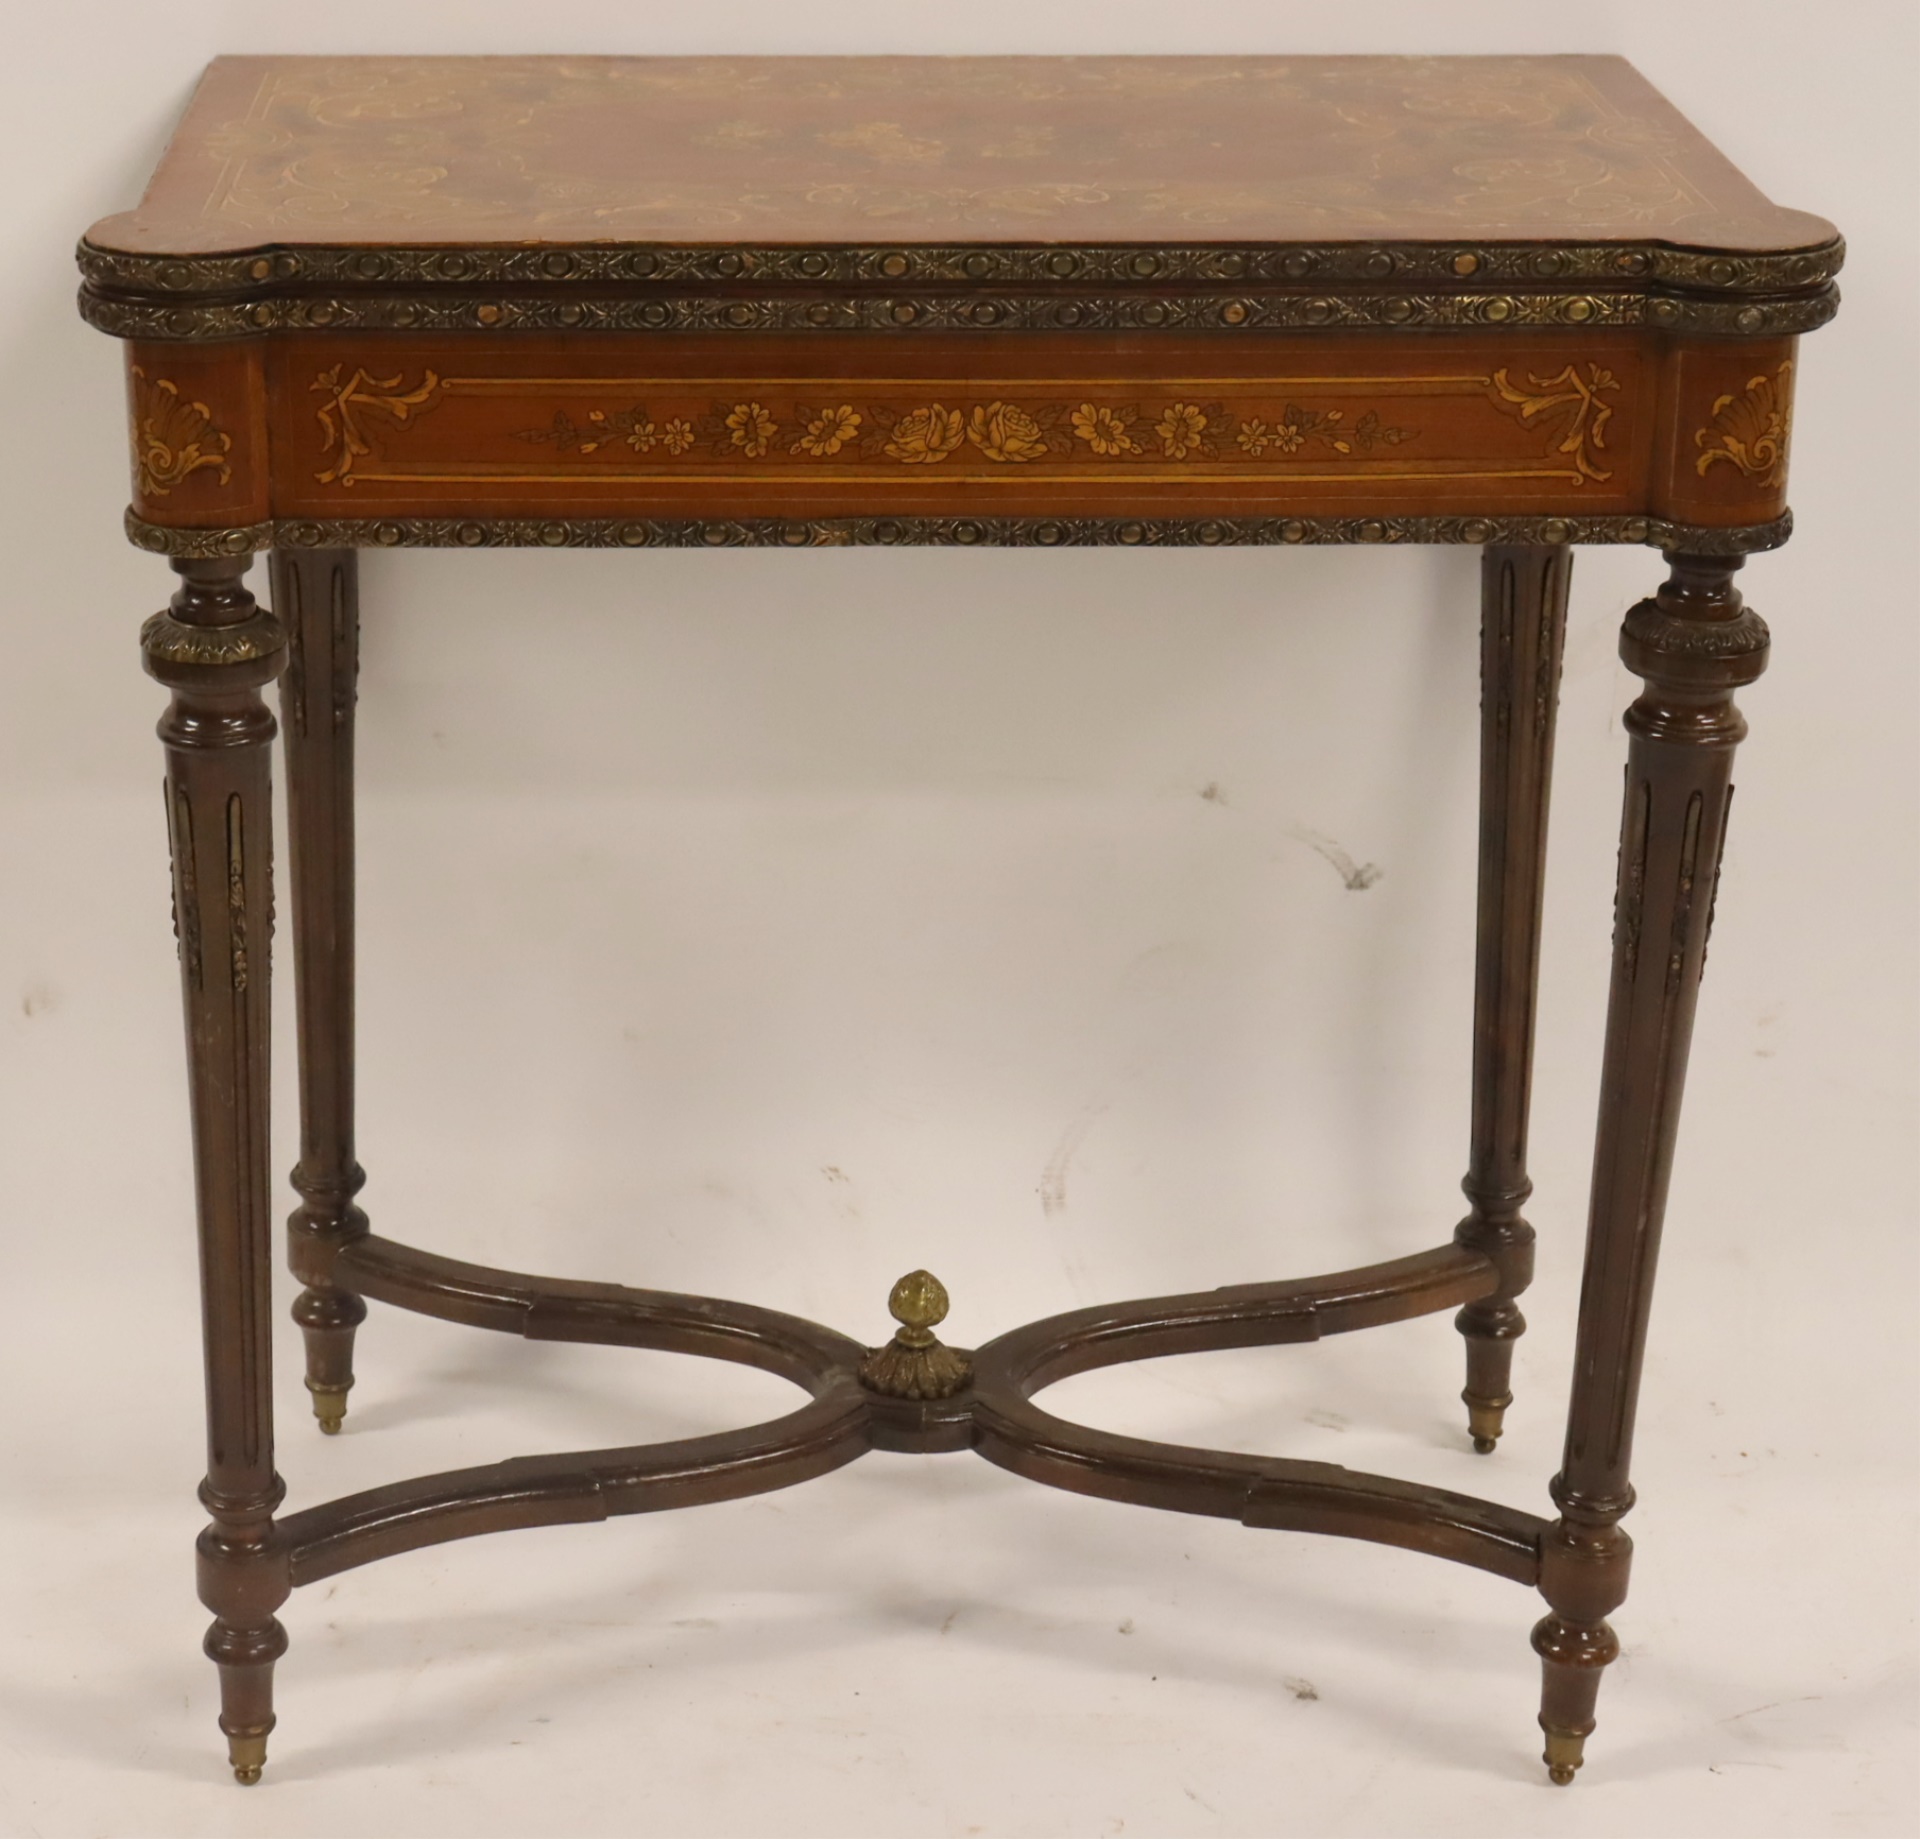 LOUIS XV1 STYLE MARQUETRY INLAID